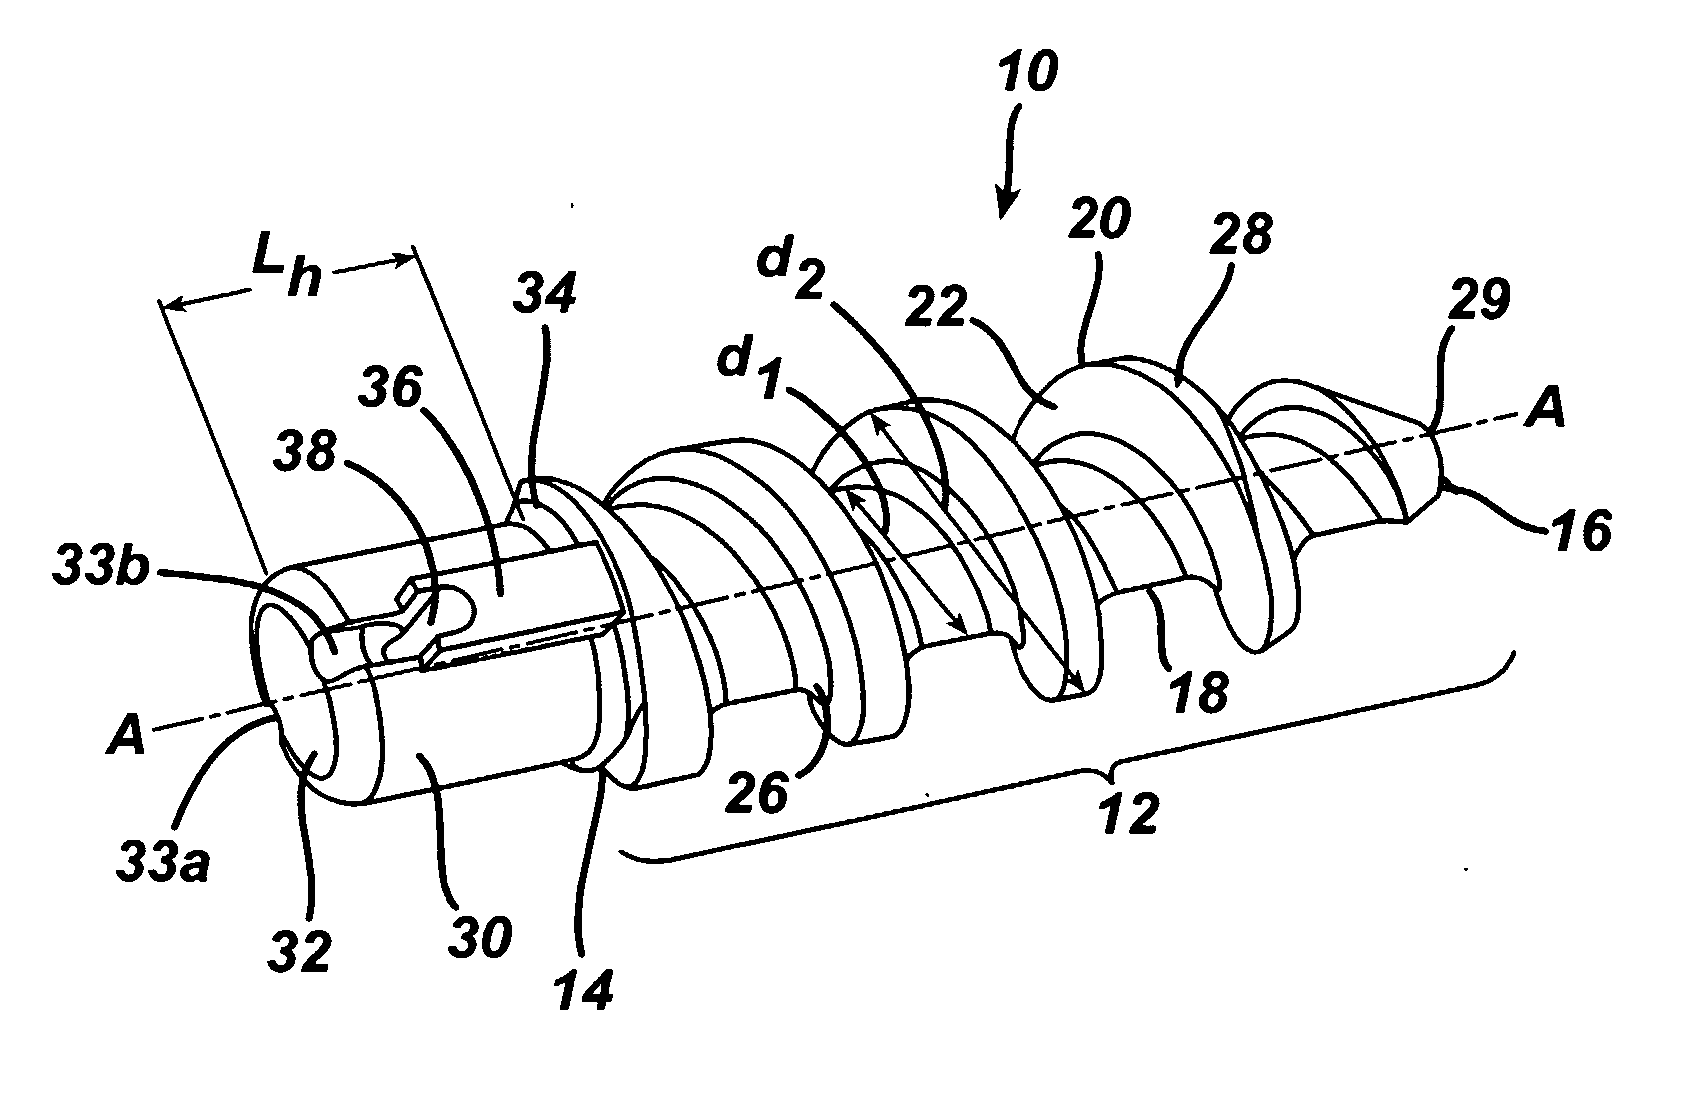 Suture anchor with improved torsional drive head